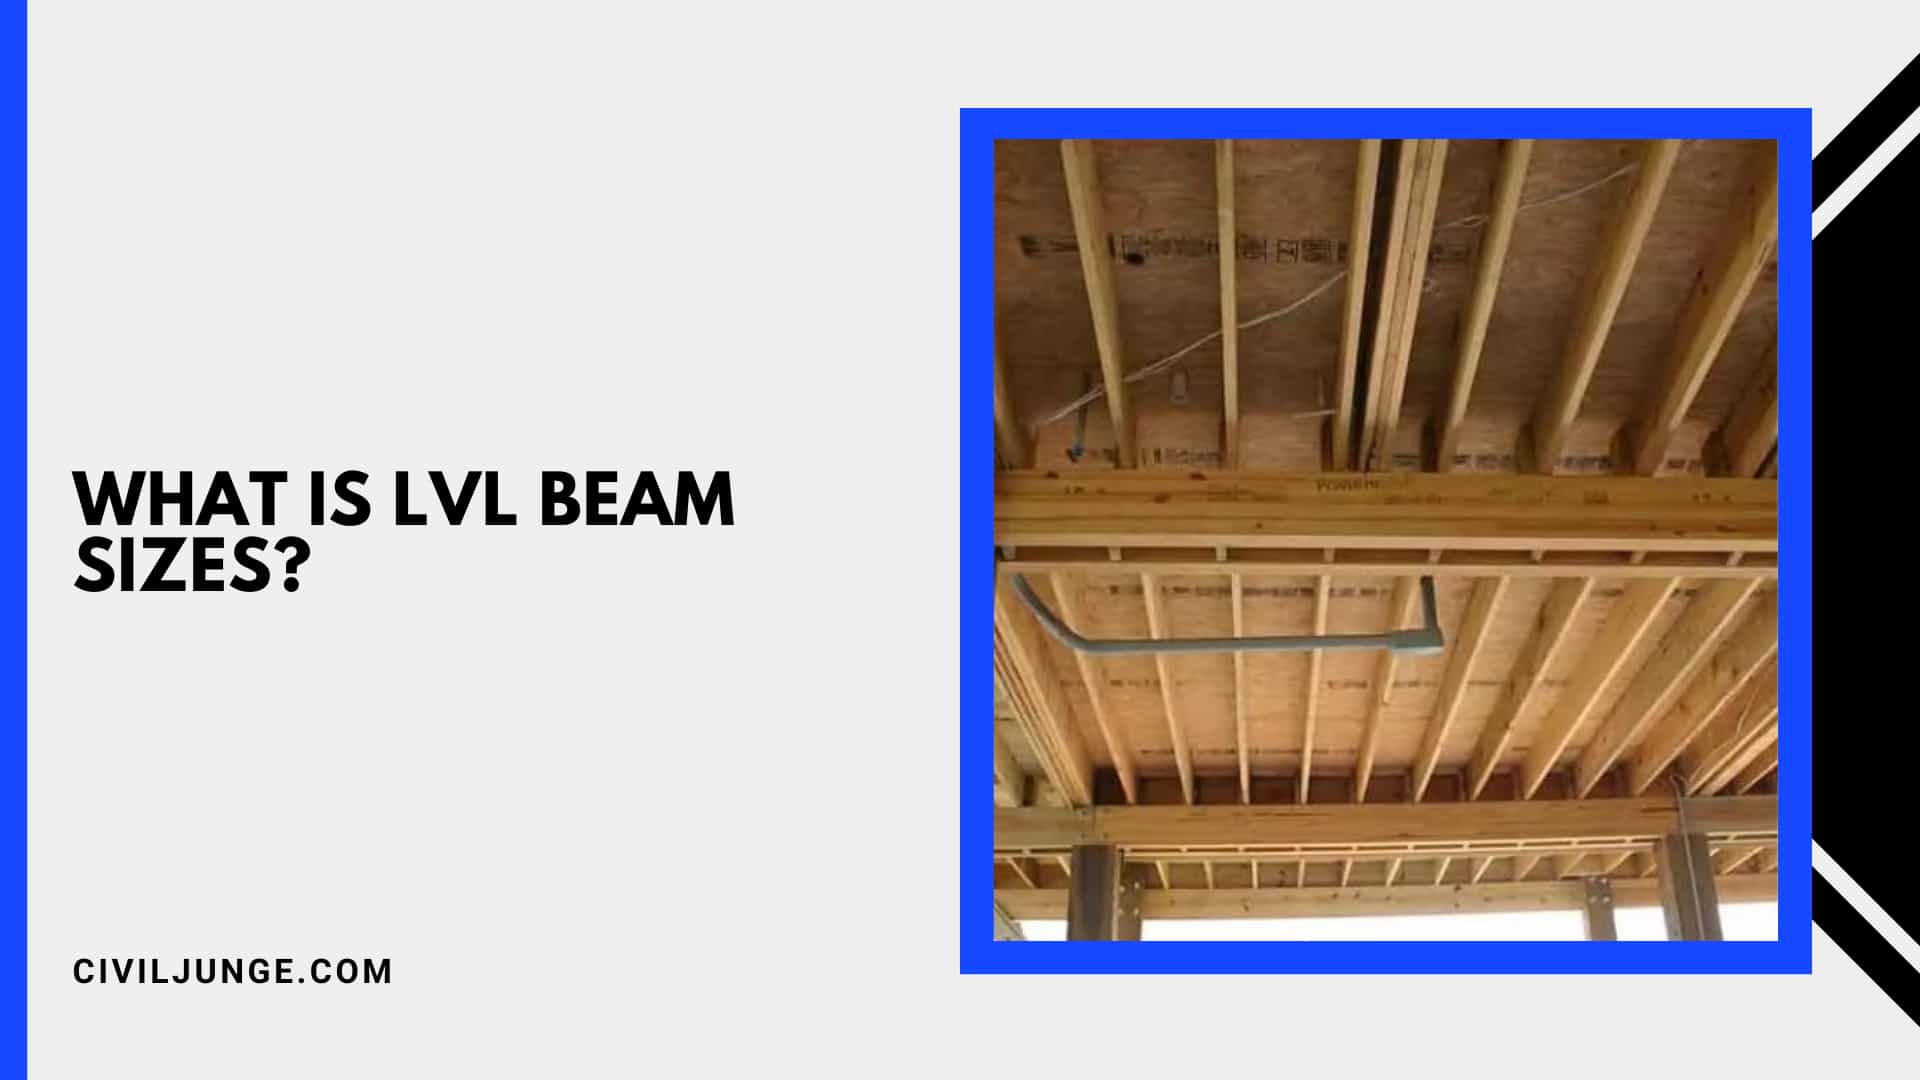 What Is Lvl Beam Sizes?